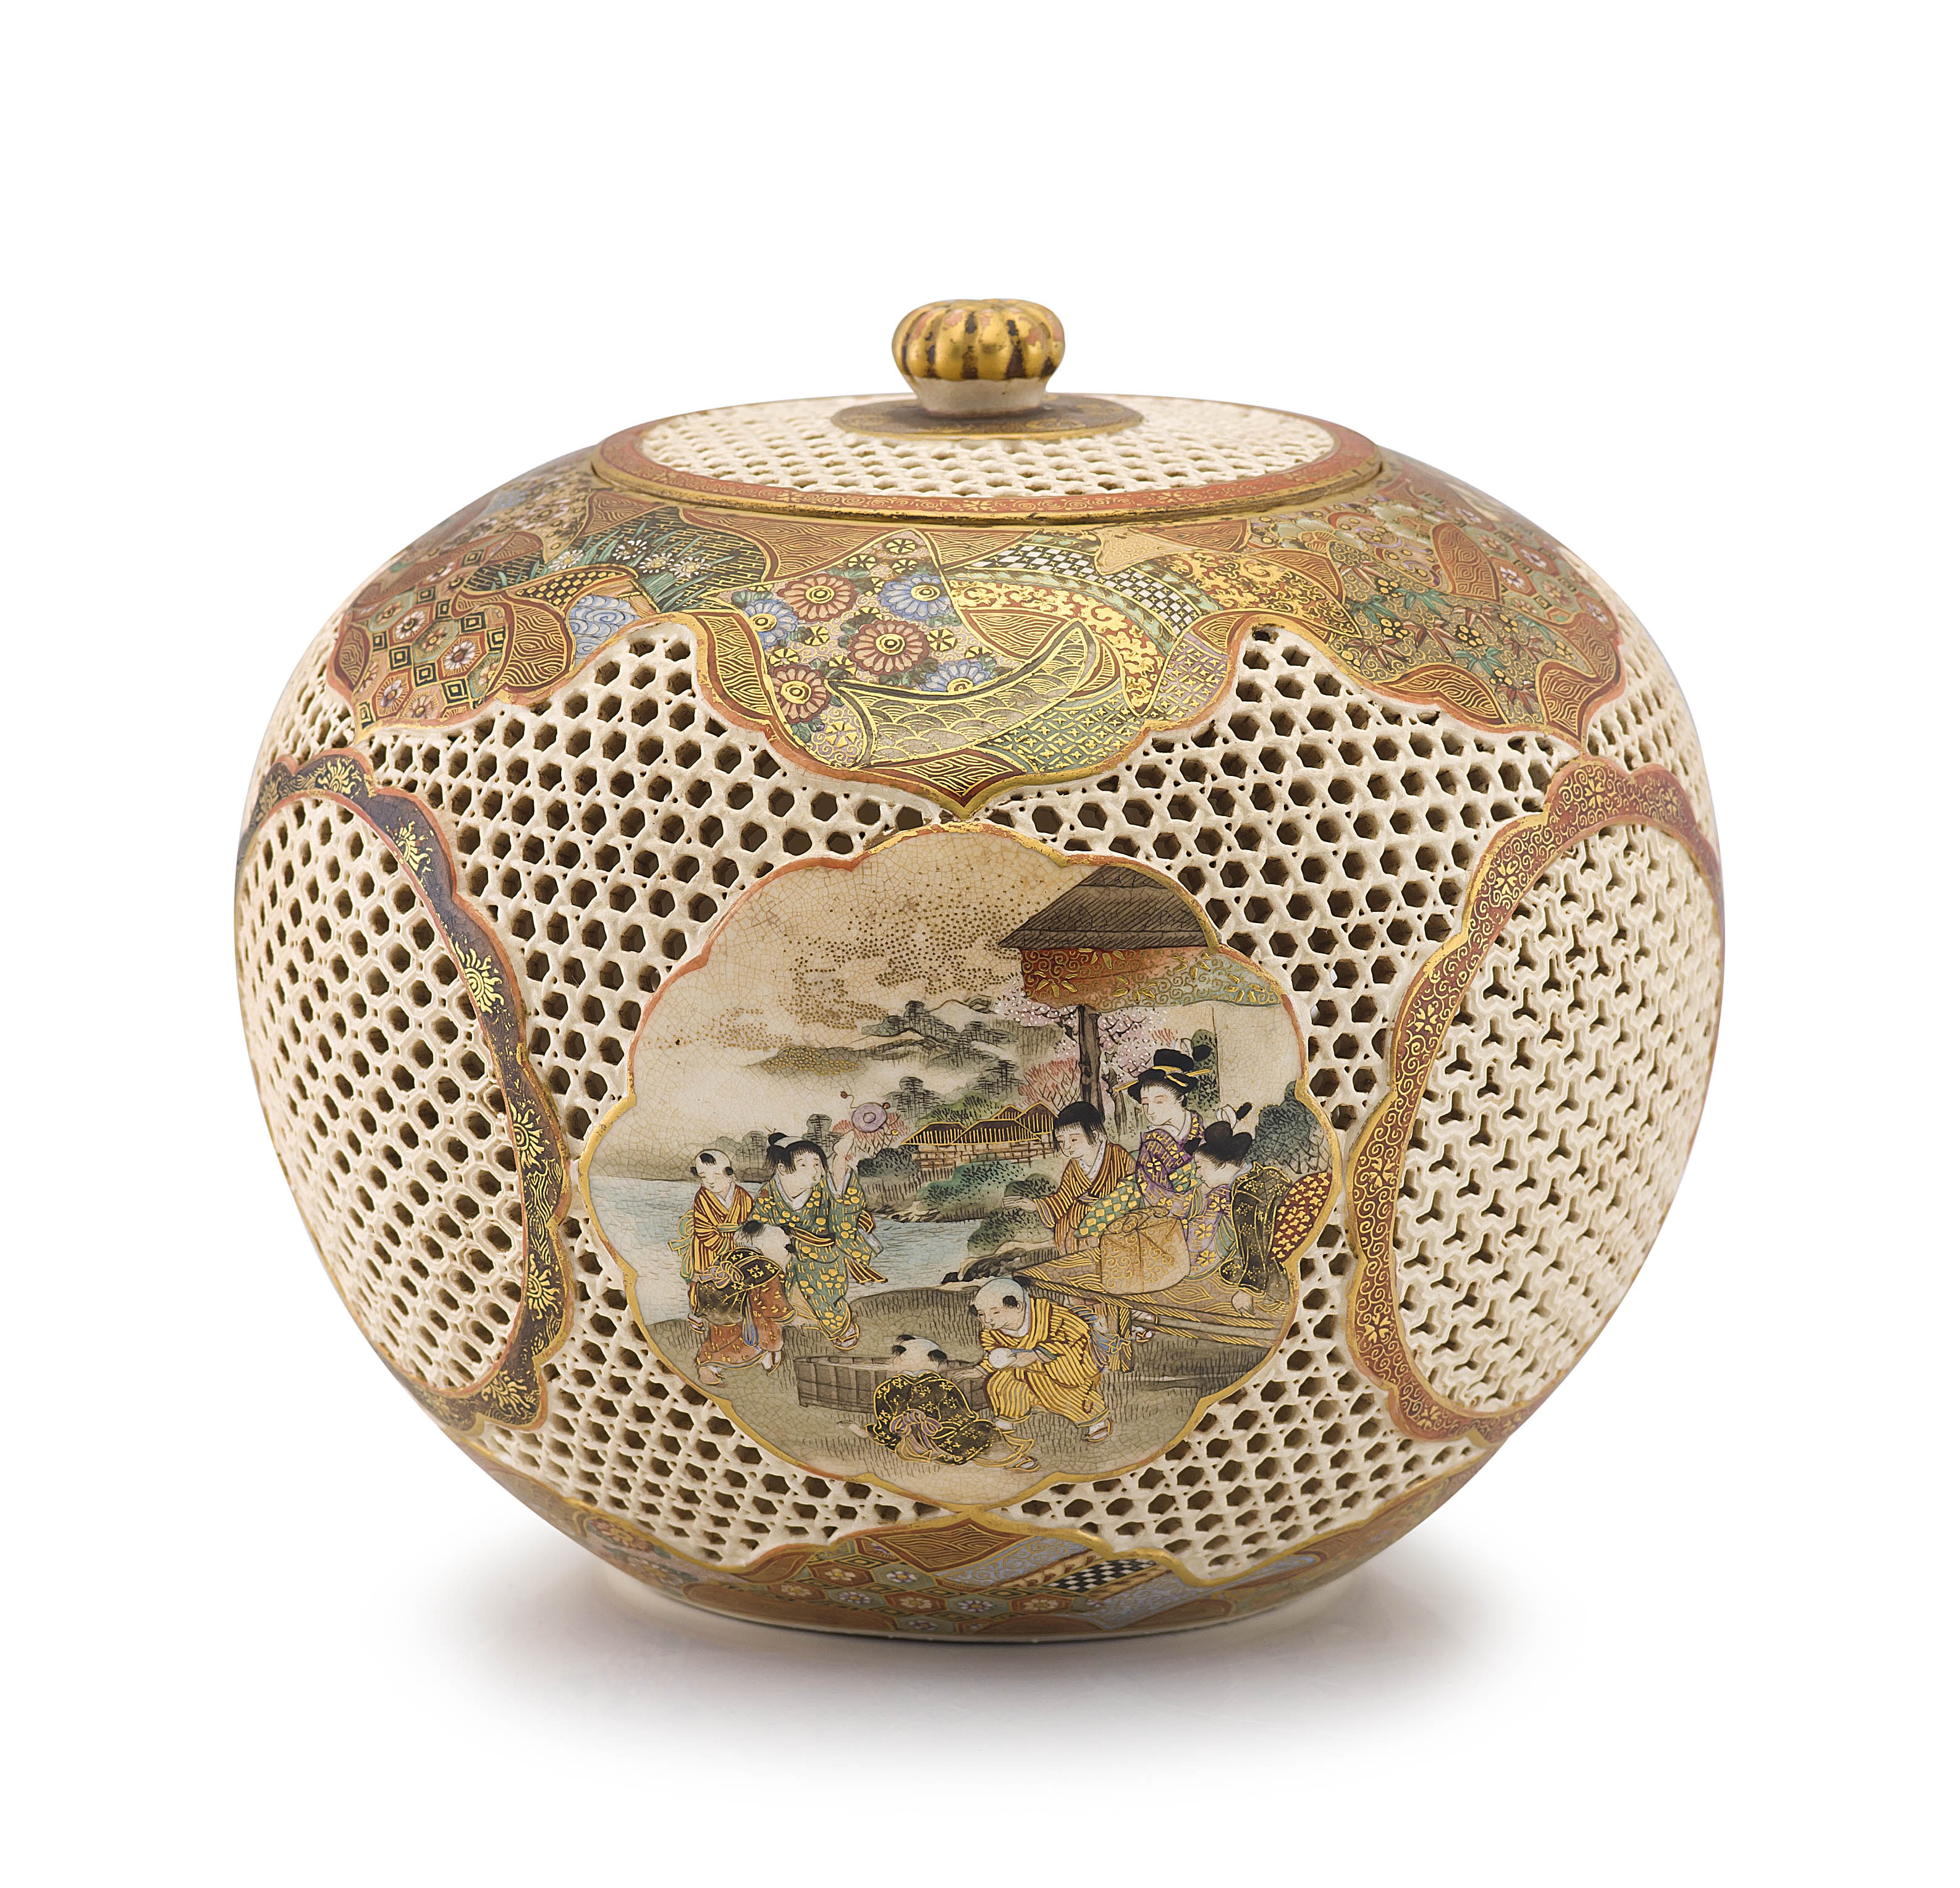 A Japanese Satsuma reticulated vessel and cover, Kyoto Ryozan, Meiji period, 1868-1912